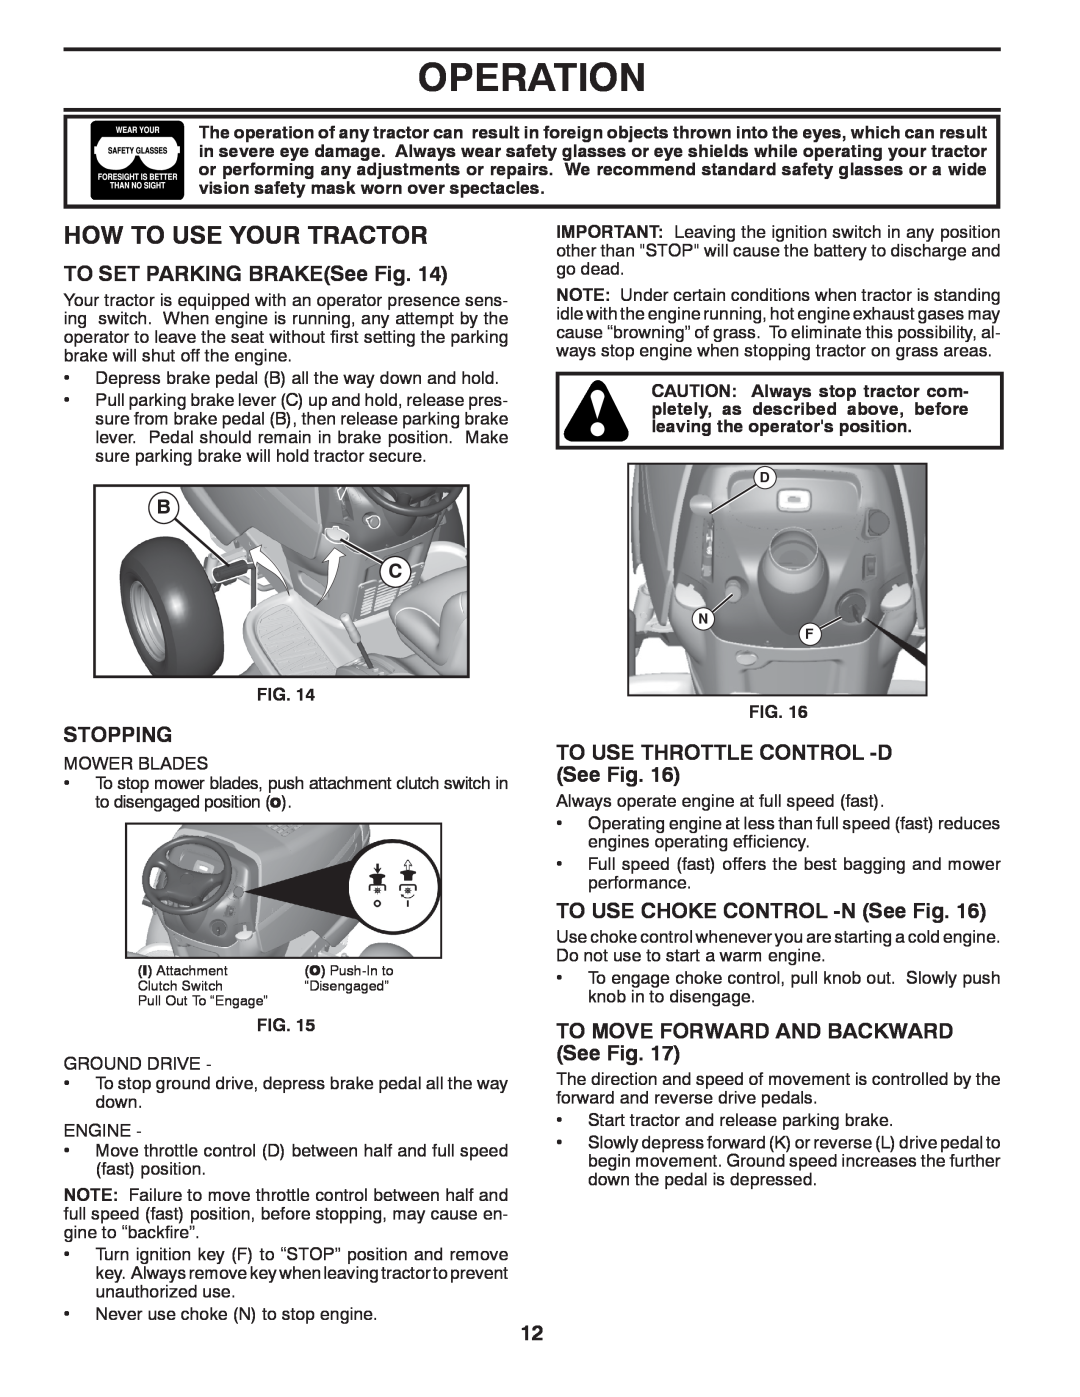 Poulan 423349 manual How To Use Your Tractor, TO SET PARKING BRAKESee Fig, Stopping, TO USE THROTTLE CONTROL -D See Fig 